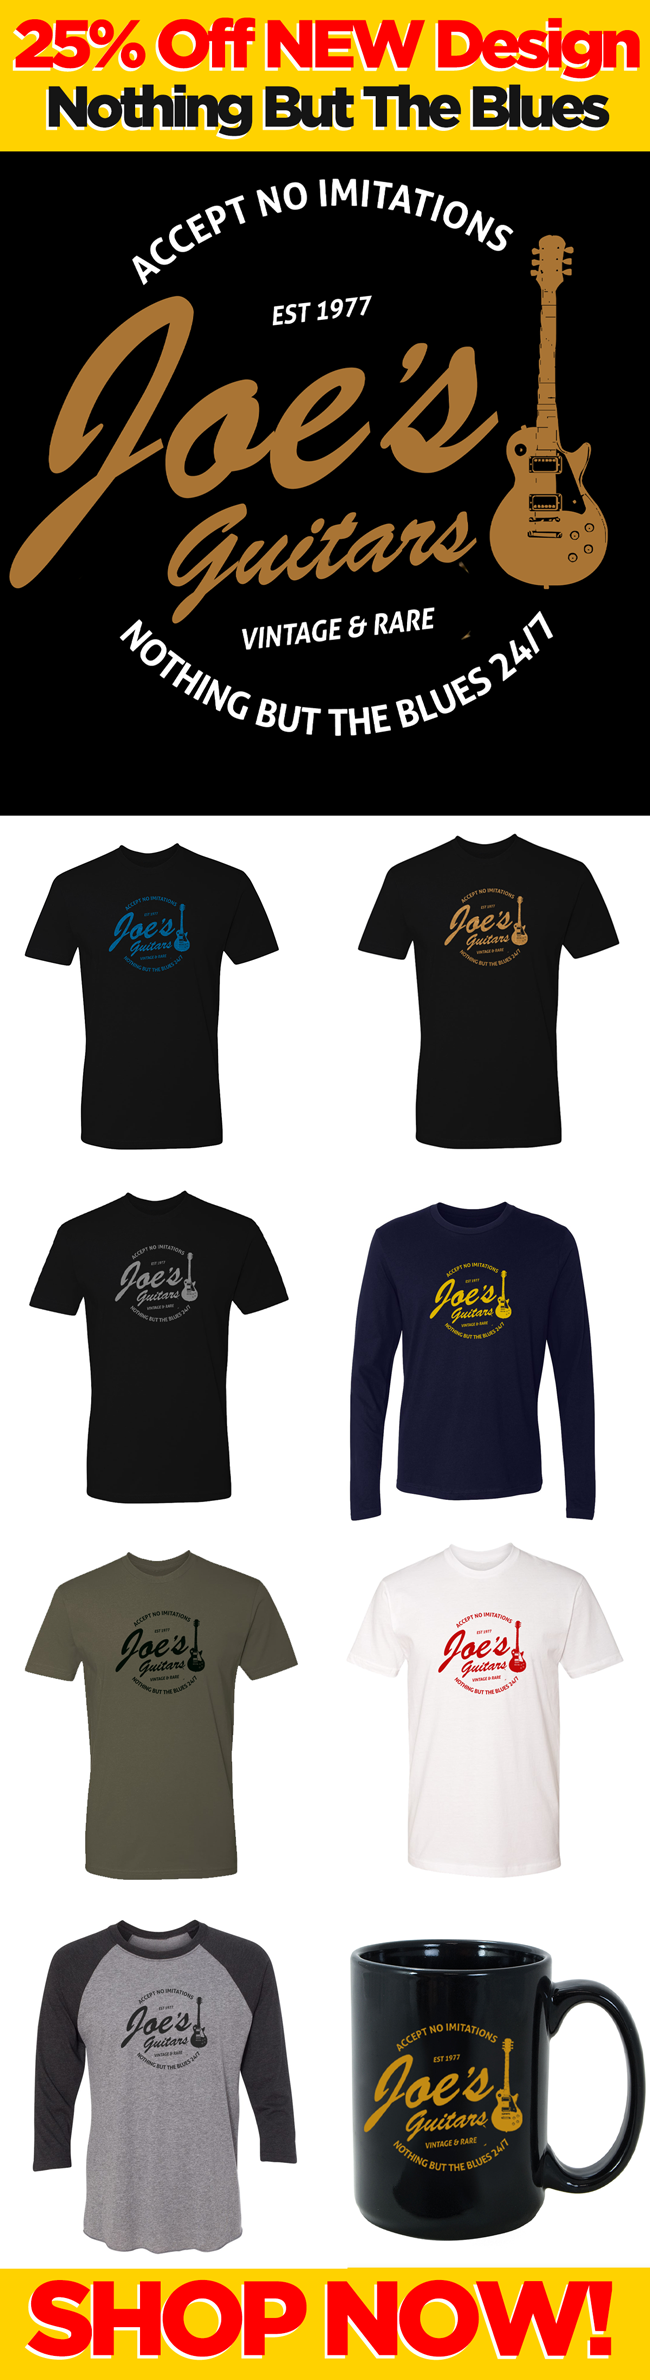 Nothing But The Blues - Joe's specialty since 1977. Get this design on your favorite apparel here.